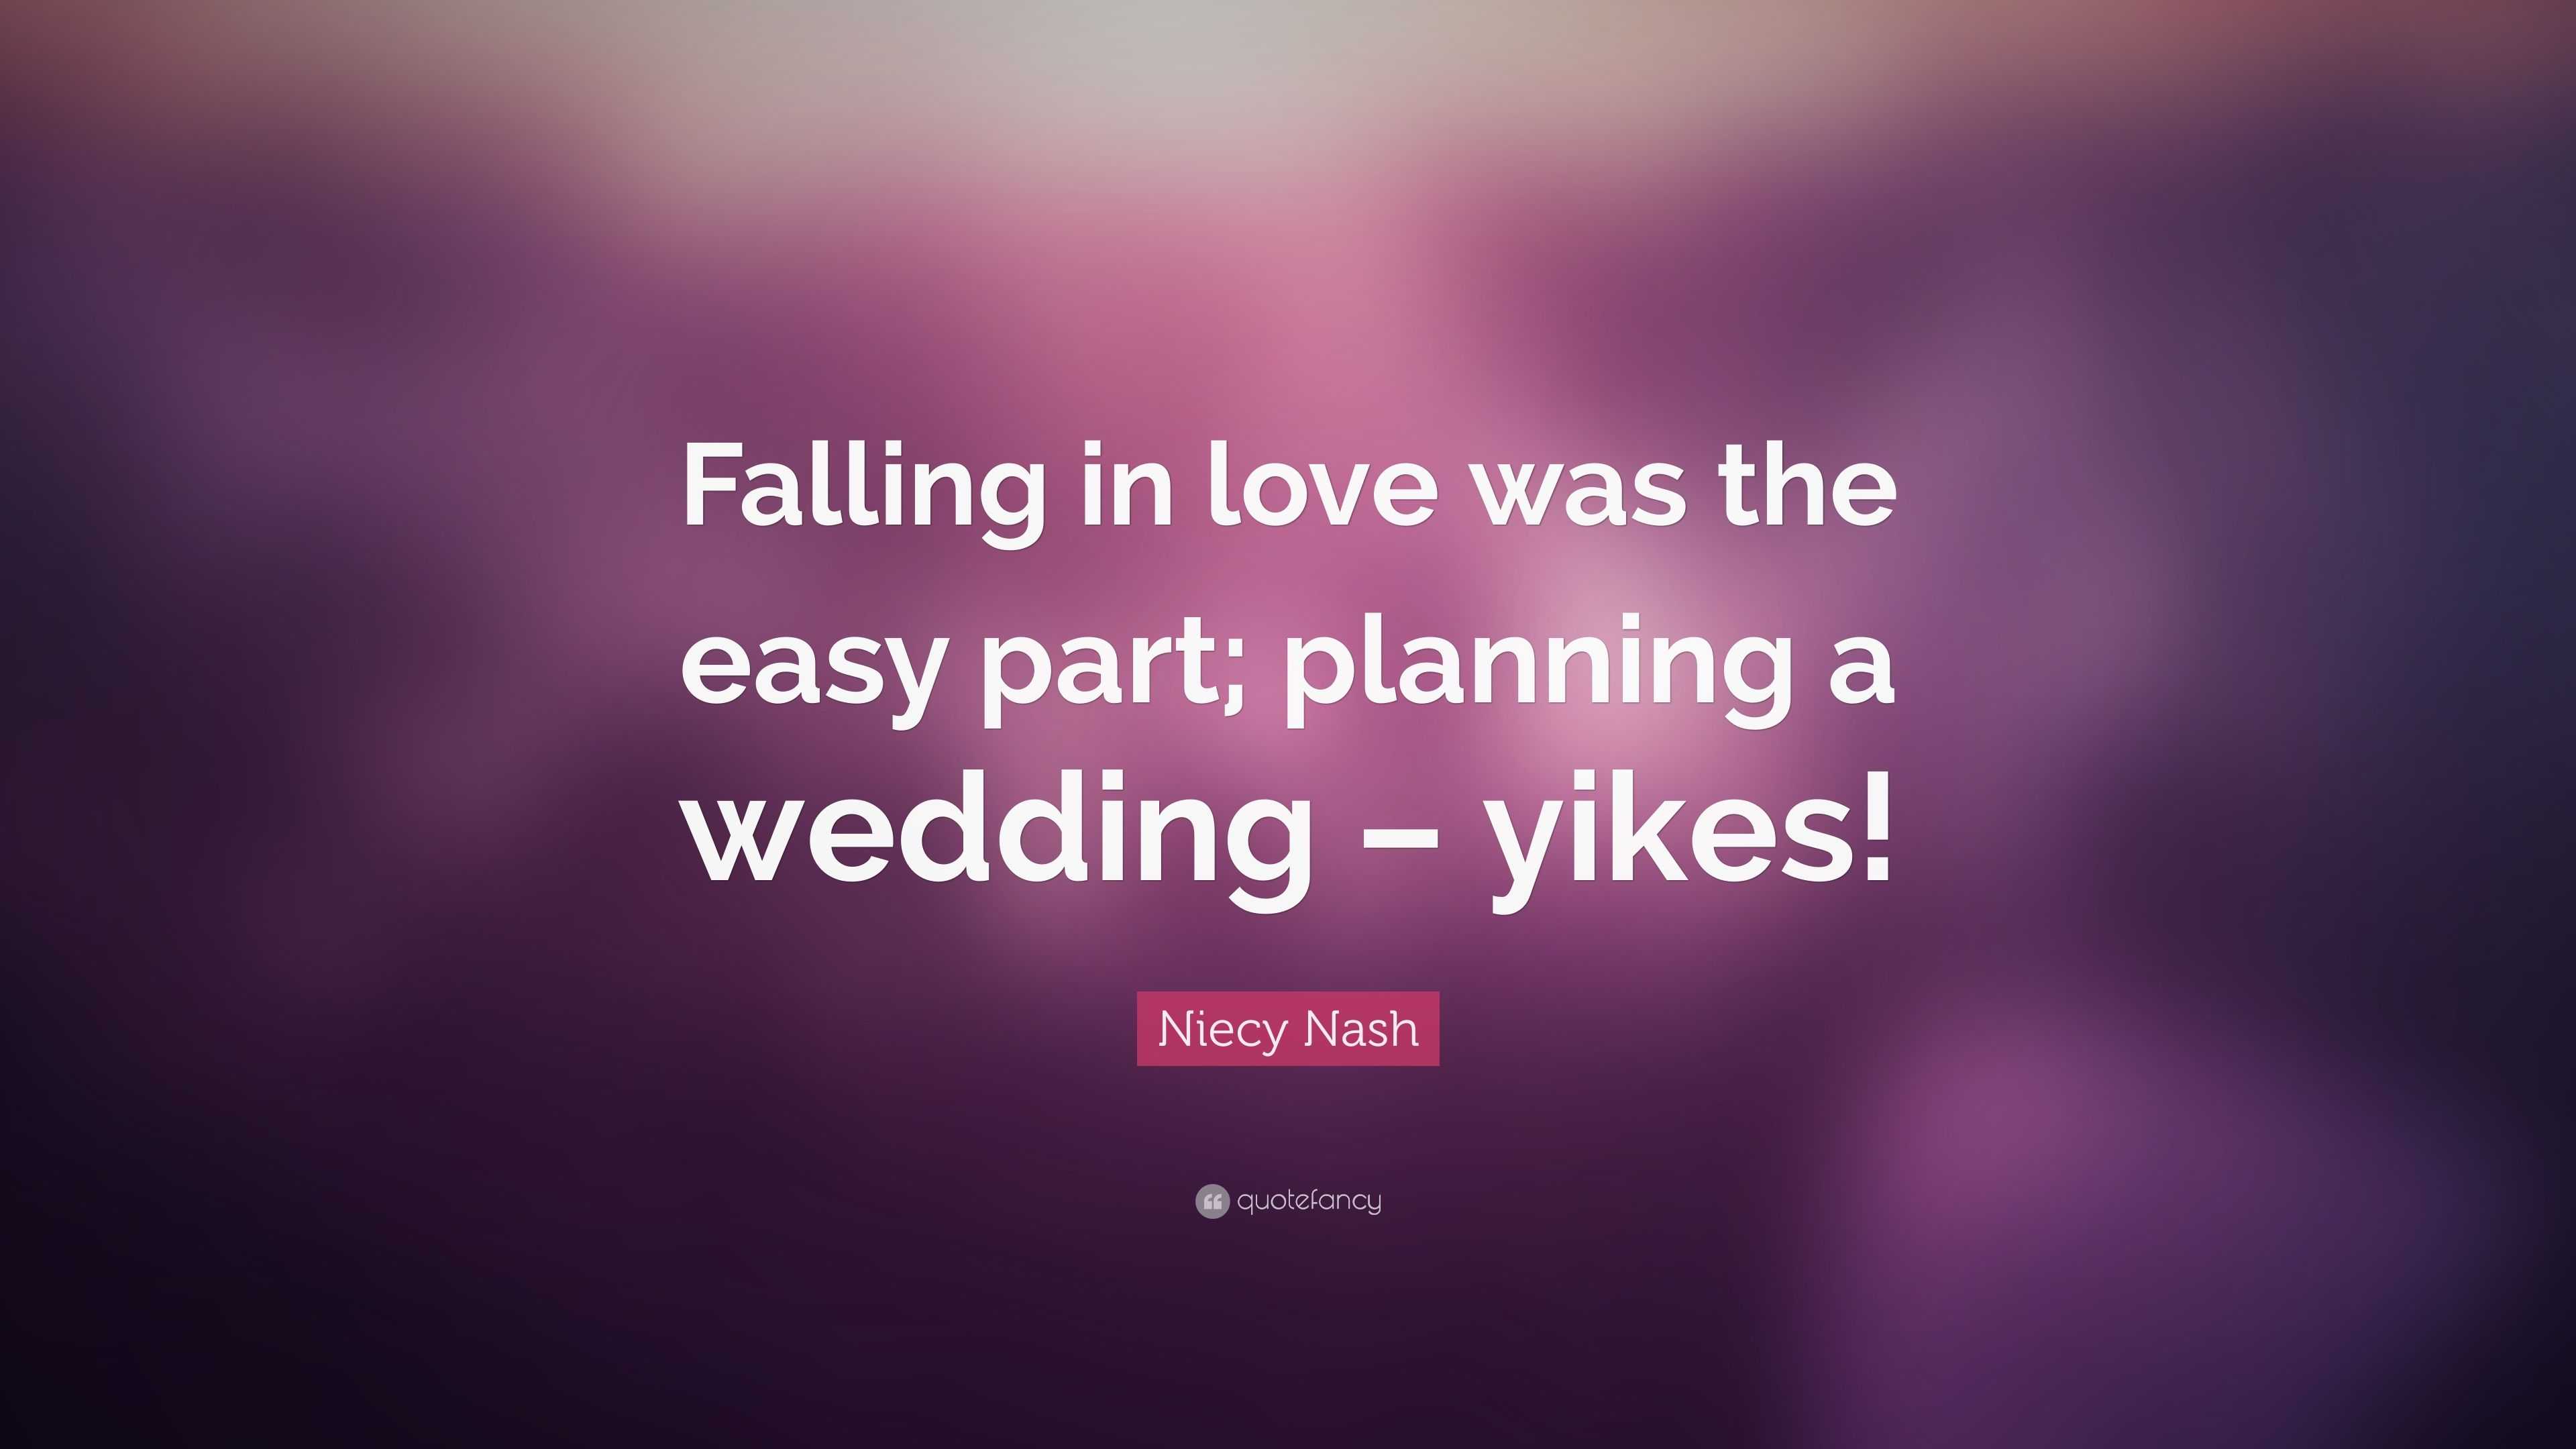 Niecy Nash Quote: “Falling in love was the easy part; planning a ...